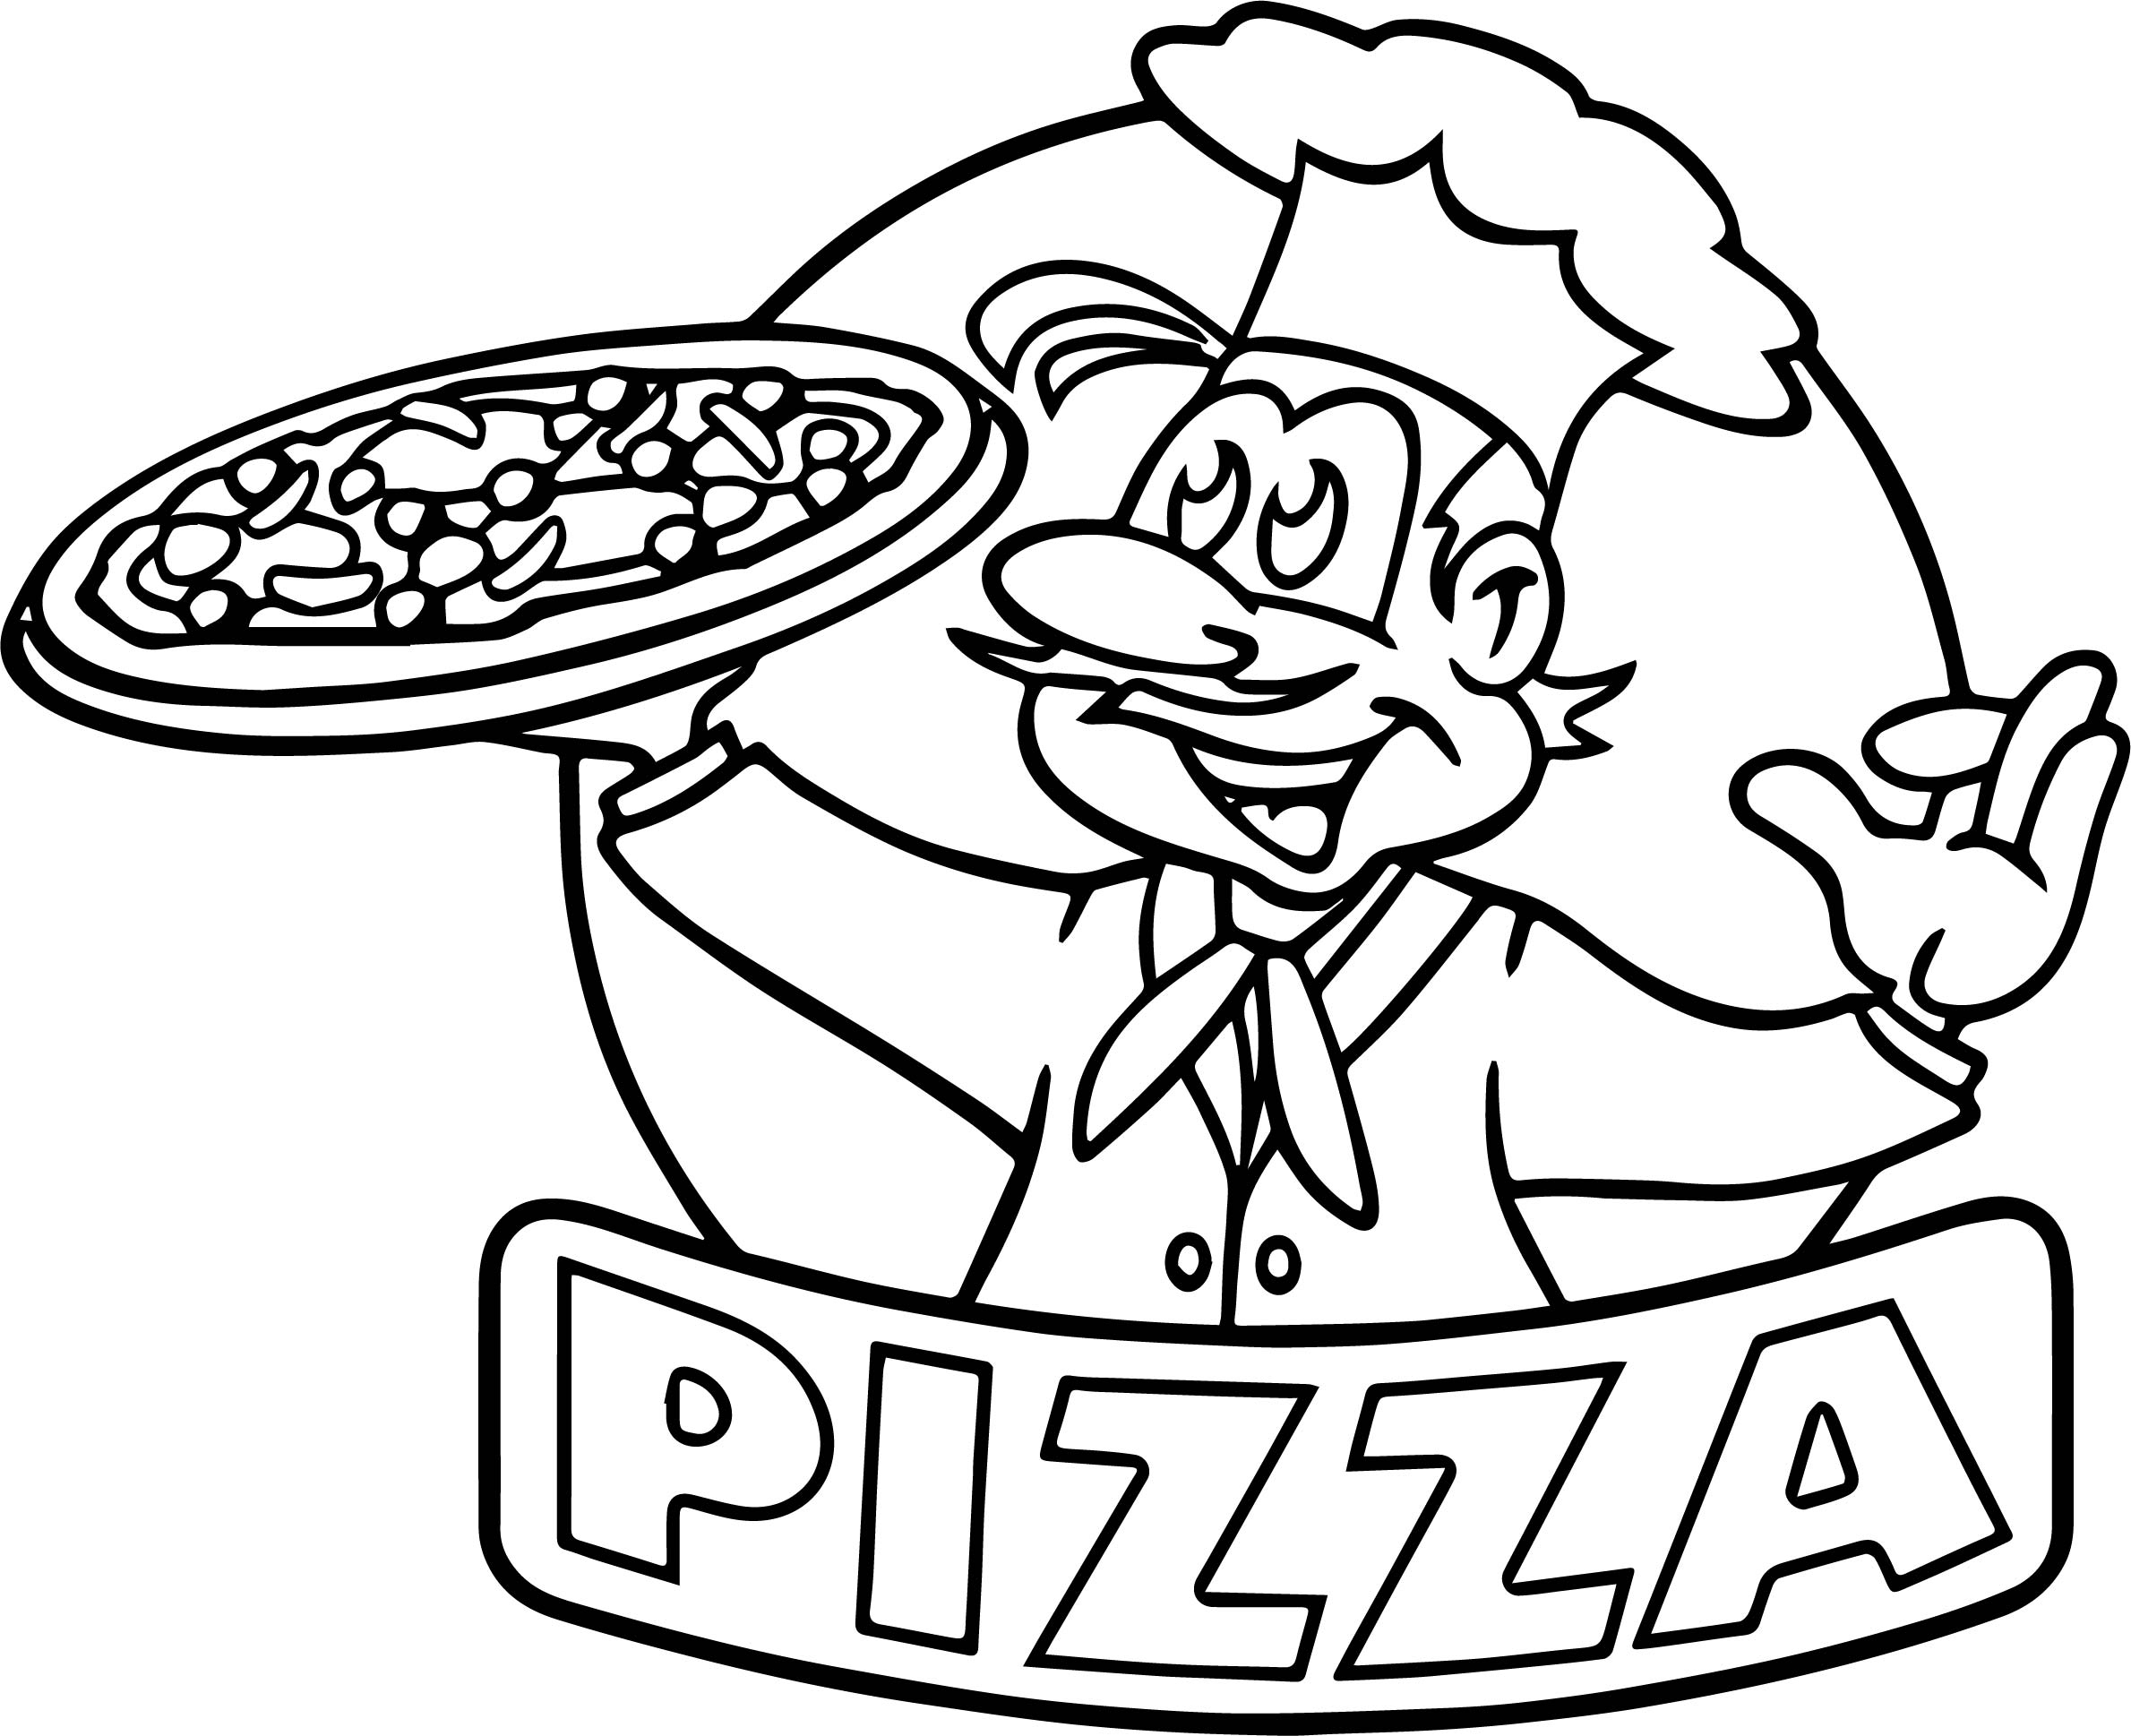 Pizza Coloring Pages Preschool at Free printable